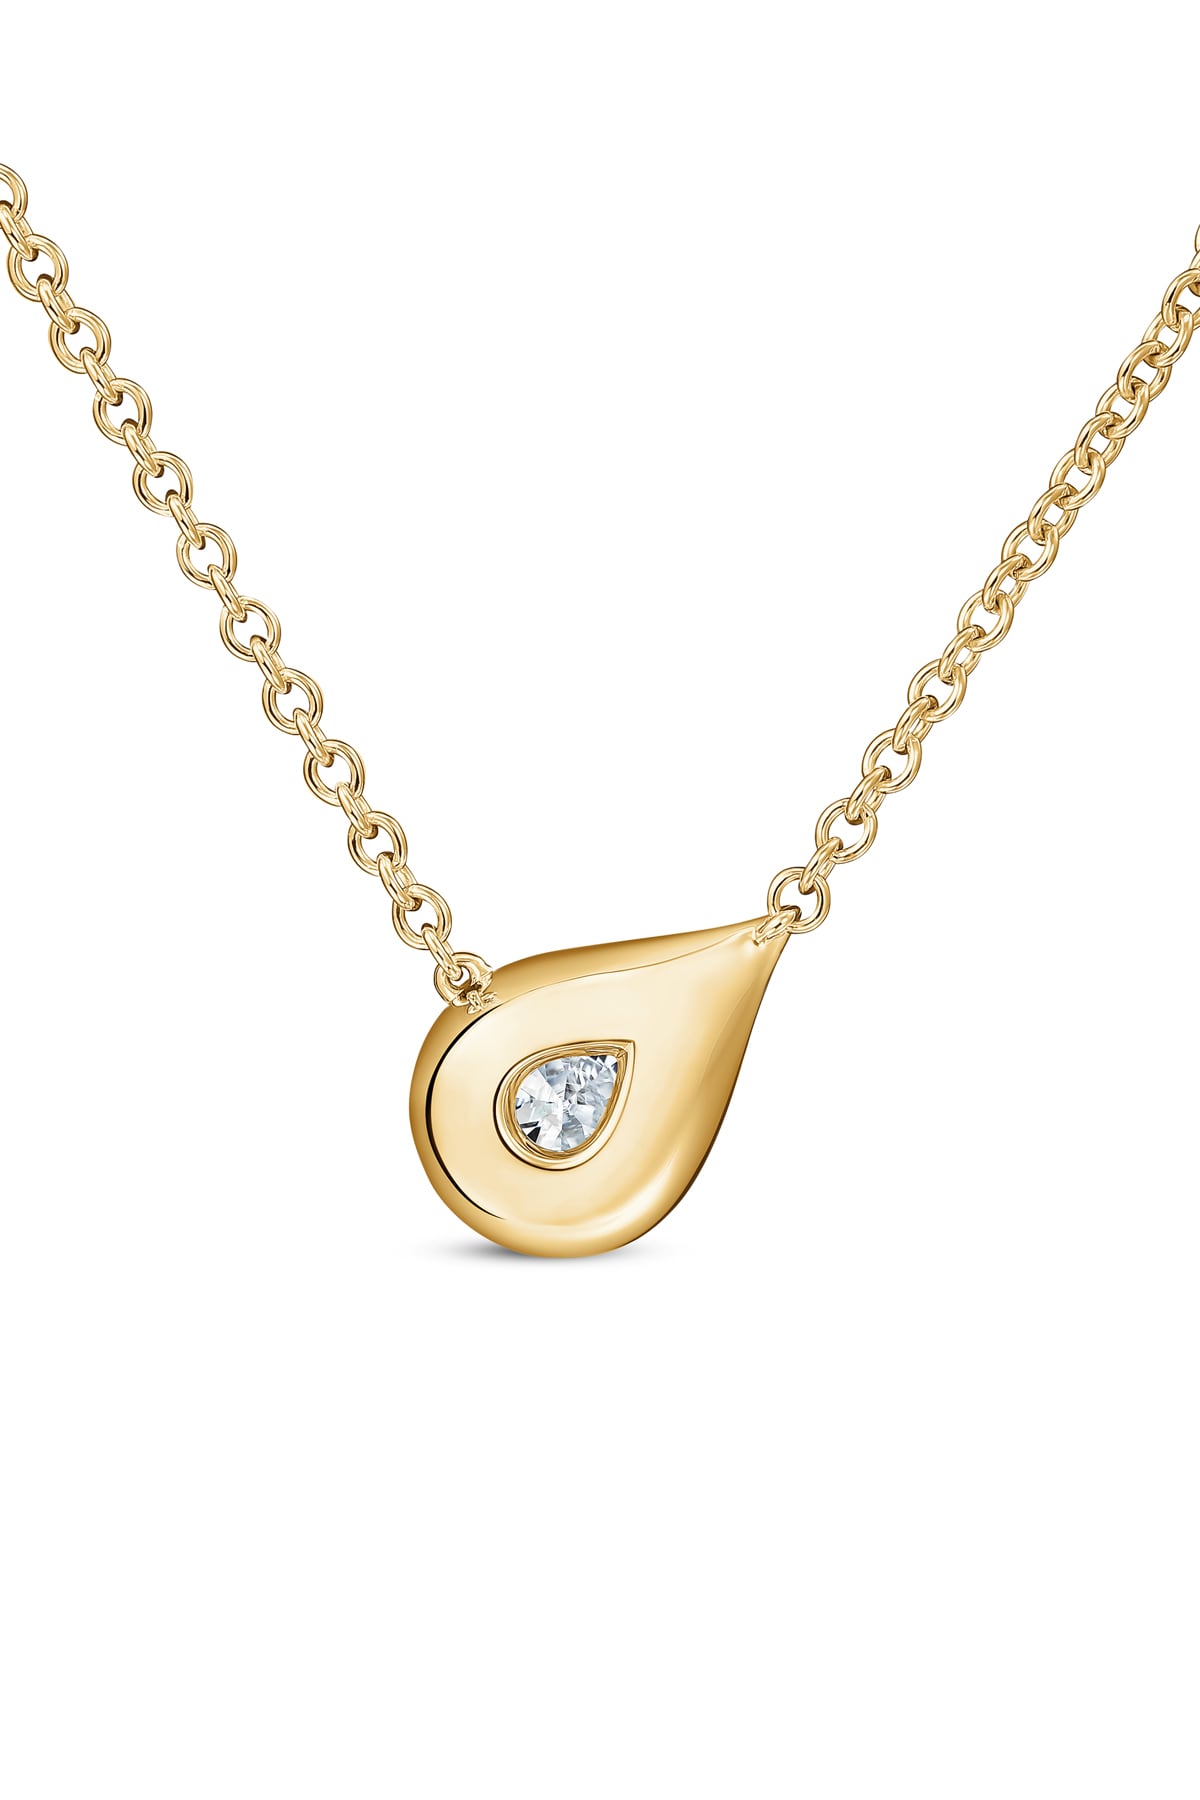 LU Droplet Pendant In Yellow Gold From Hearts On Fire exclusive to LeGassick Jewellery, Gold Coast, Australia.